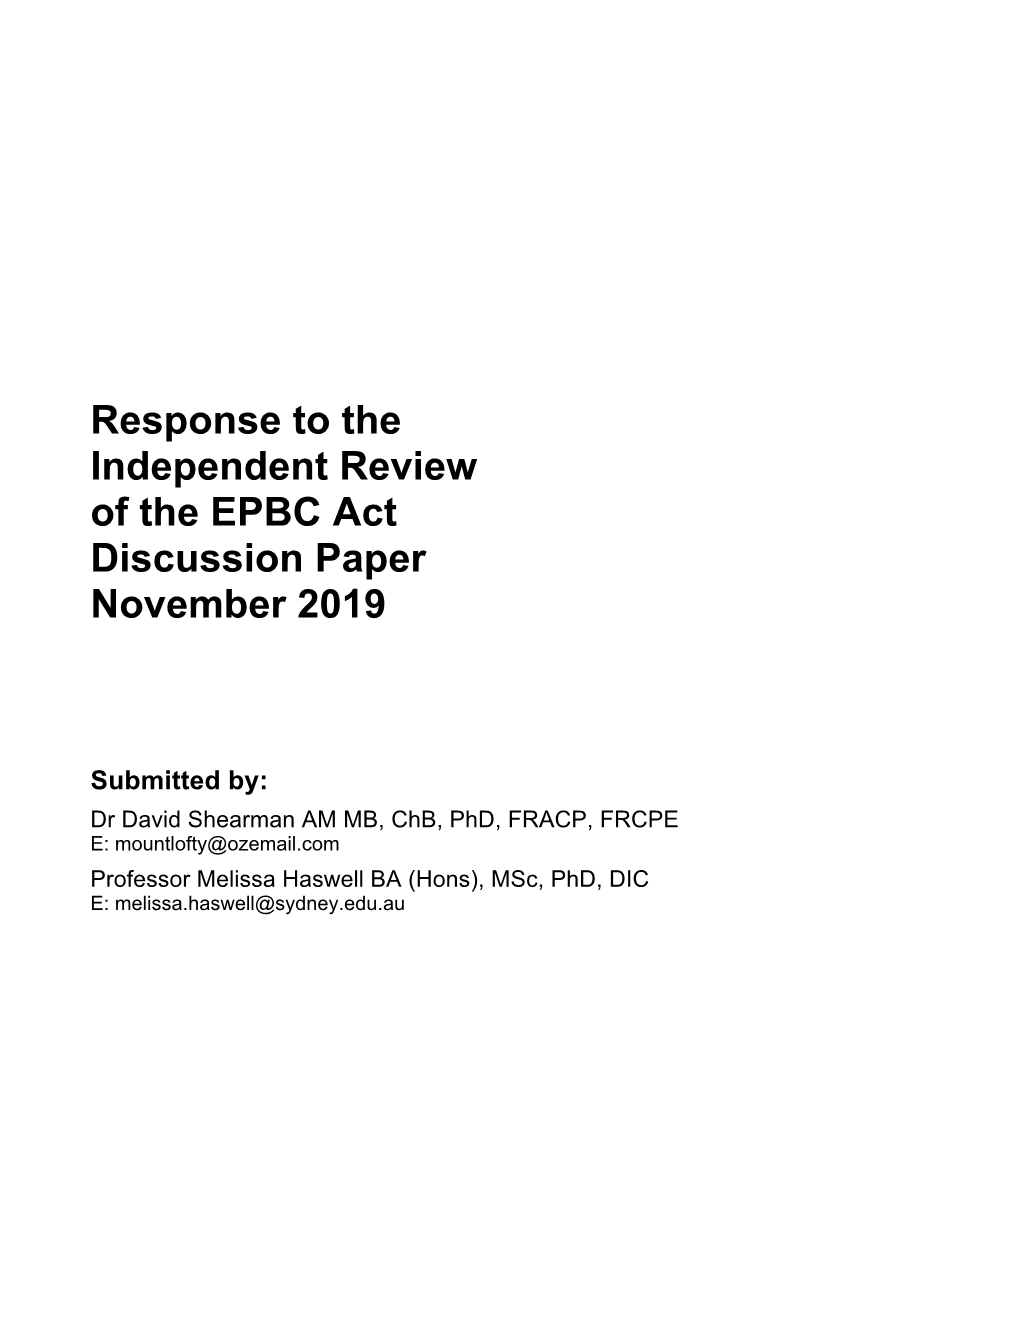 Response to the Independent Review of the EPBC Act Discussion Paper November 2019